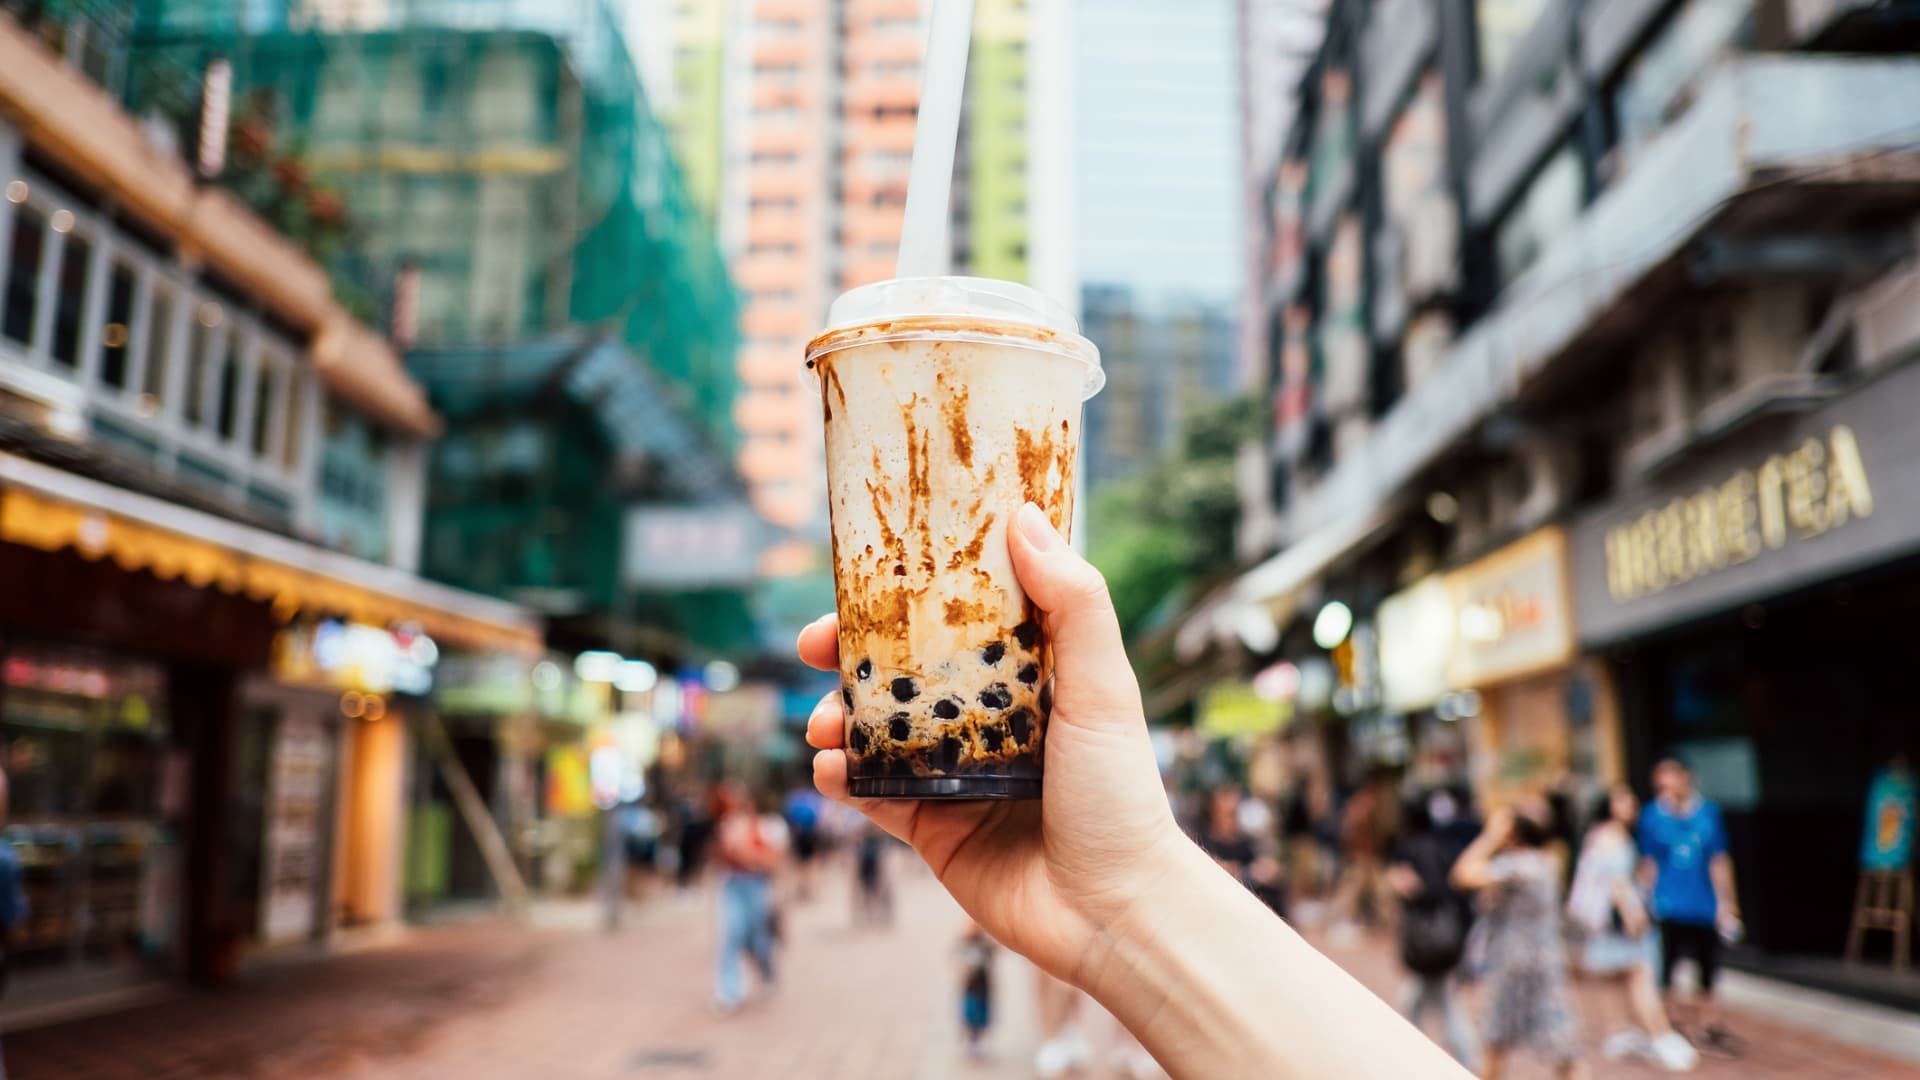 Shares of Chinese bubble tea company Chabaidao plunge practically 40% in Hong Kong debut